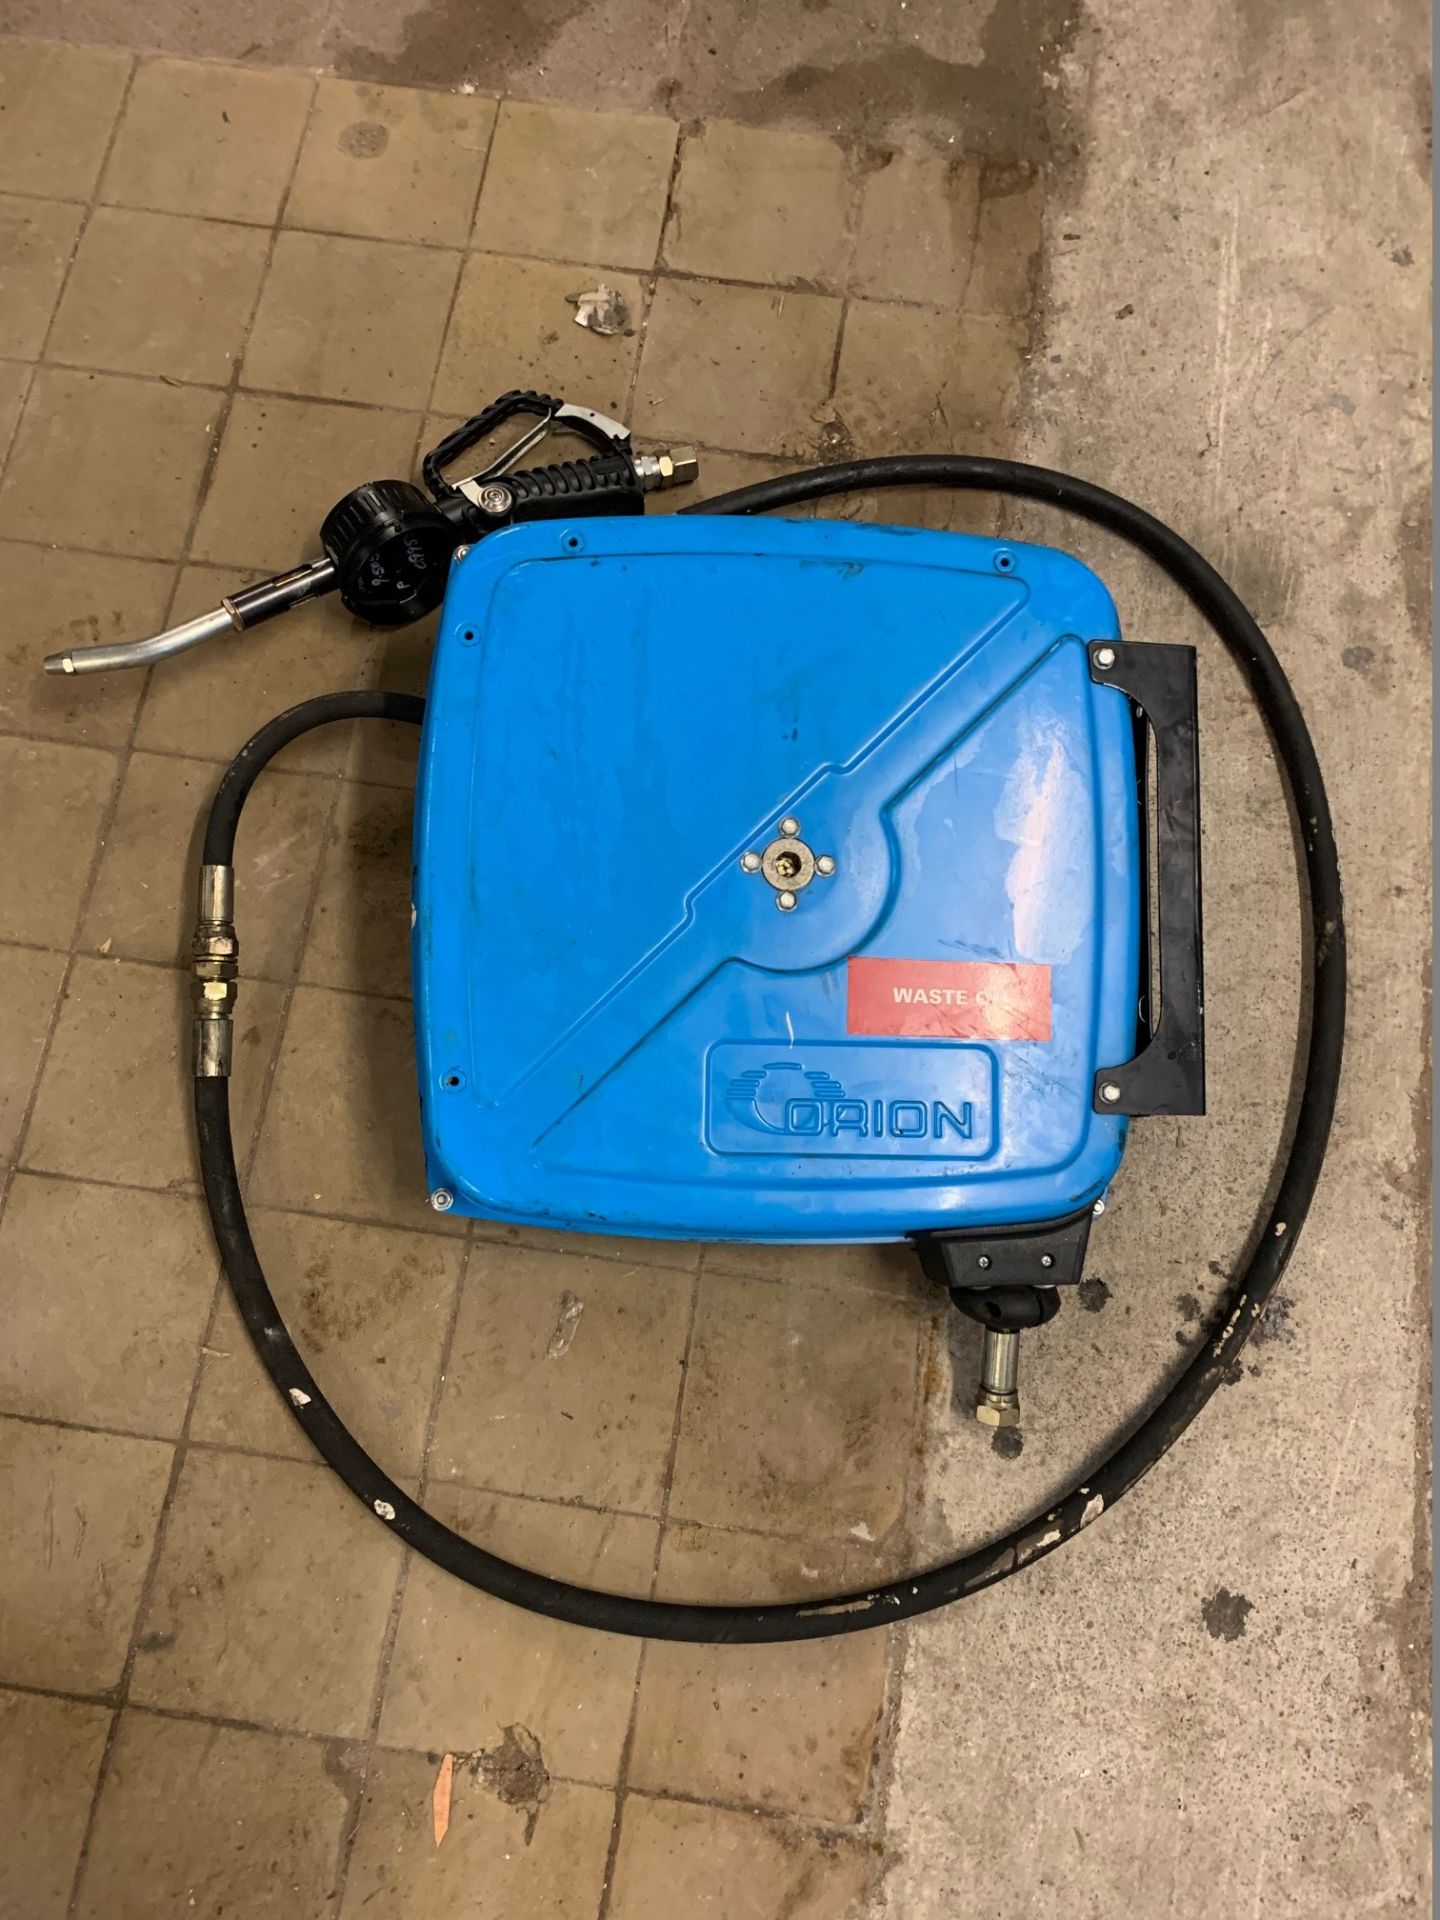 Alentec Orion Enclosed Hose Reel for Oil, Air & Water - Product Code 24910